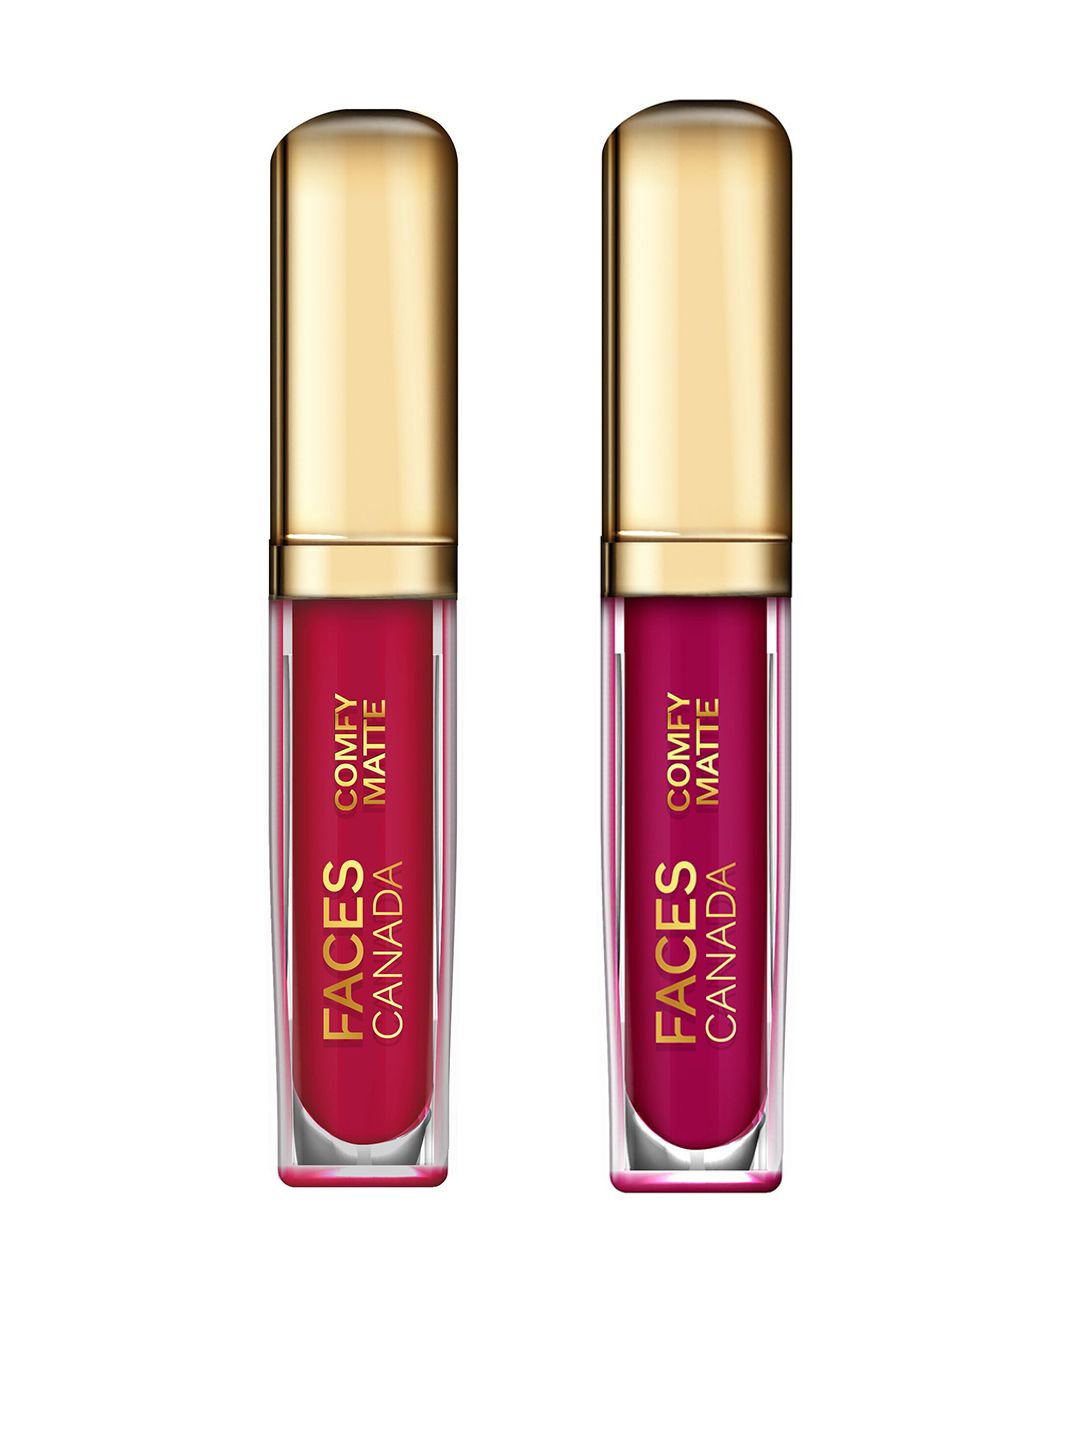 FACES CANADA Set of 2 Comfy Matte Lip Colors - Any Day Now 04 & On My Way 01 Price in India